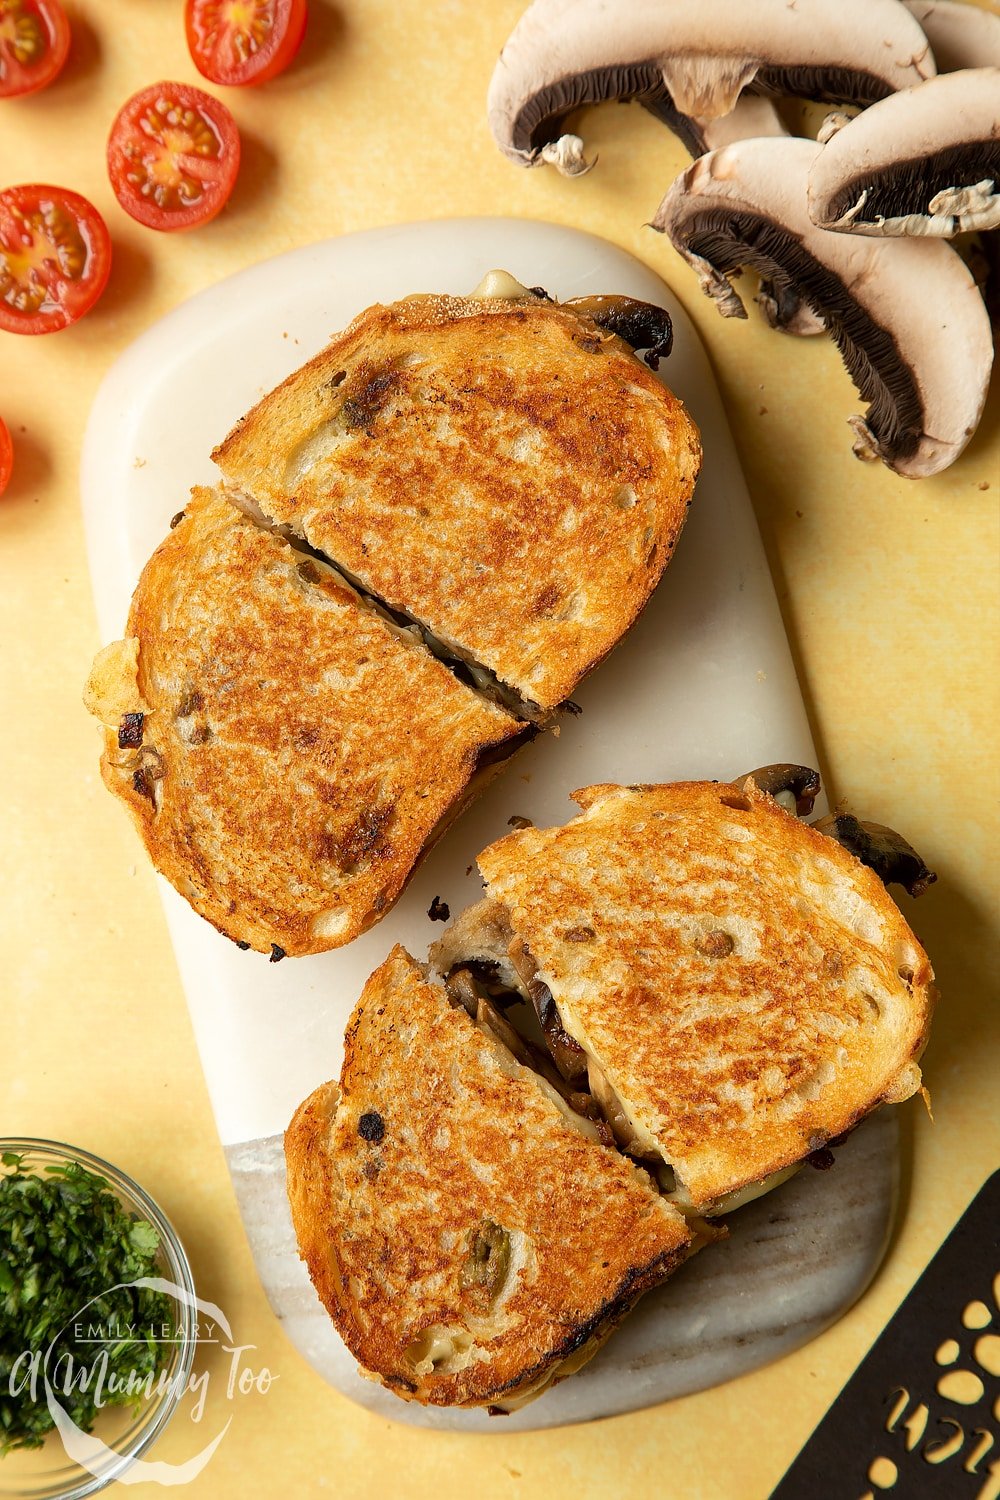 Two Jarlsberg cheese and mushroom toasties are on a serving board, both cut in half.